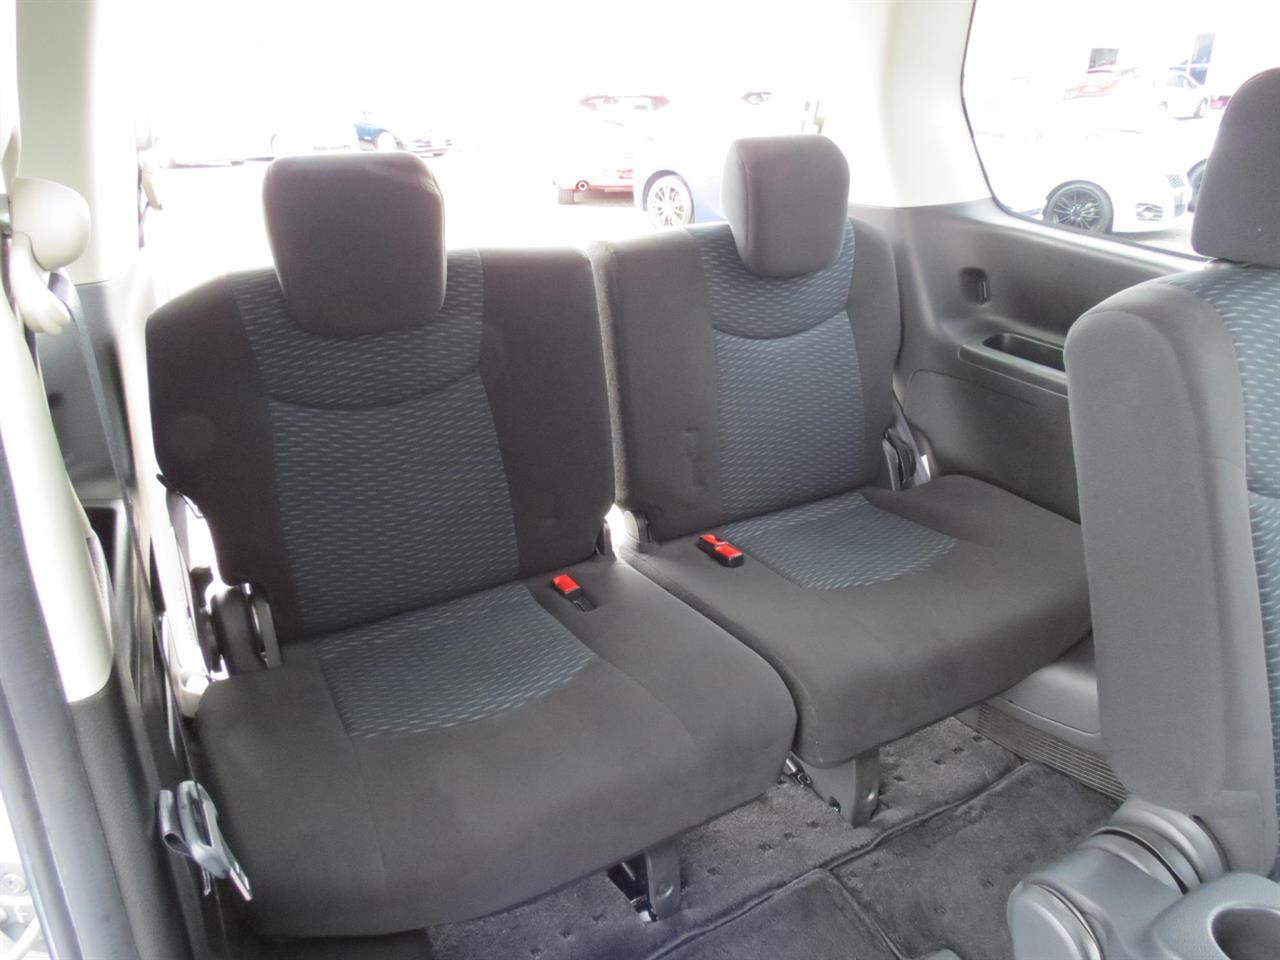 2014 Nissan Serena only $54 weekly